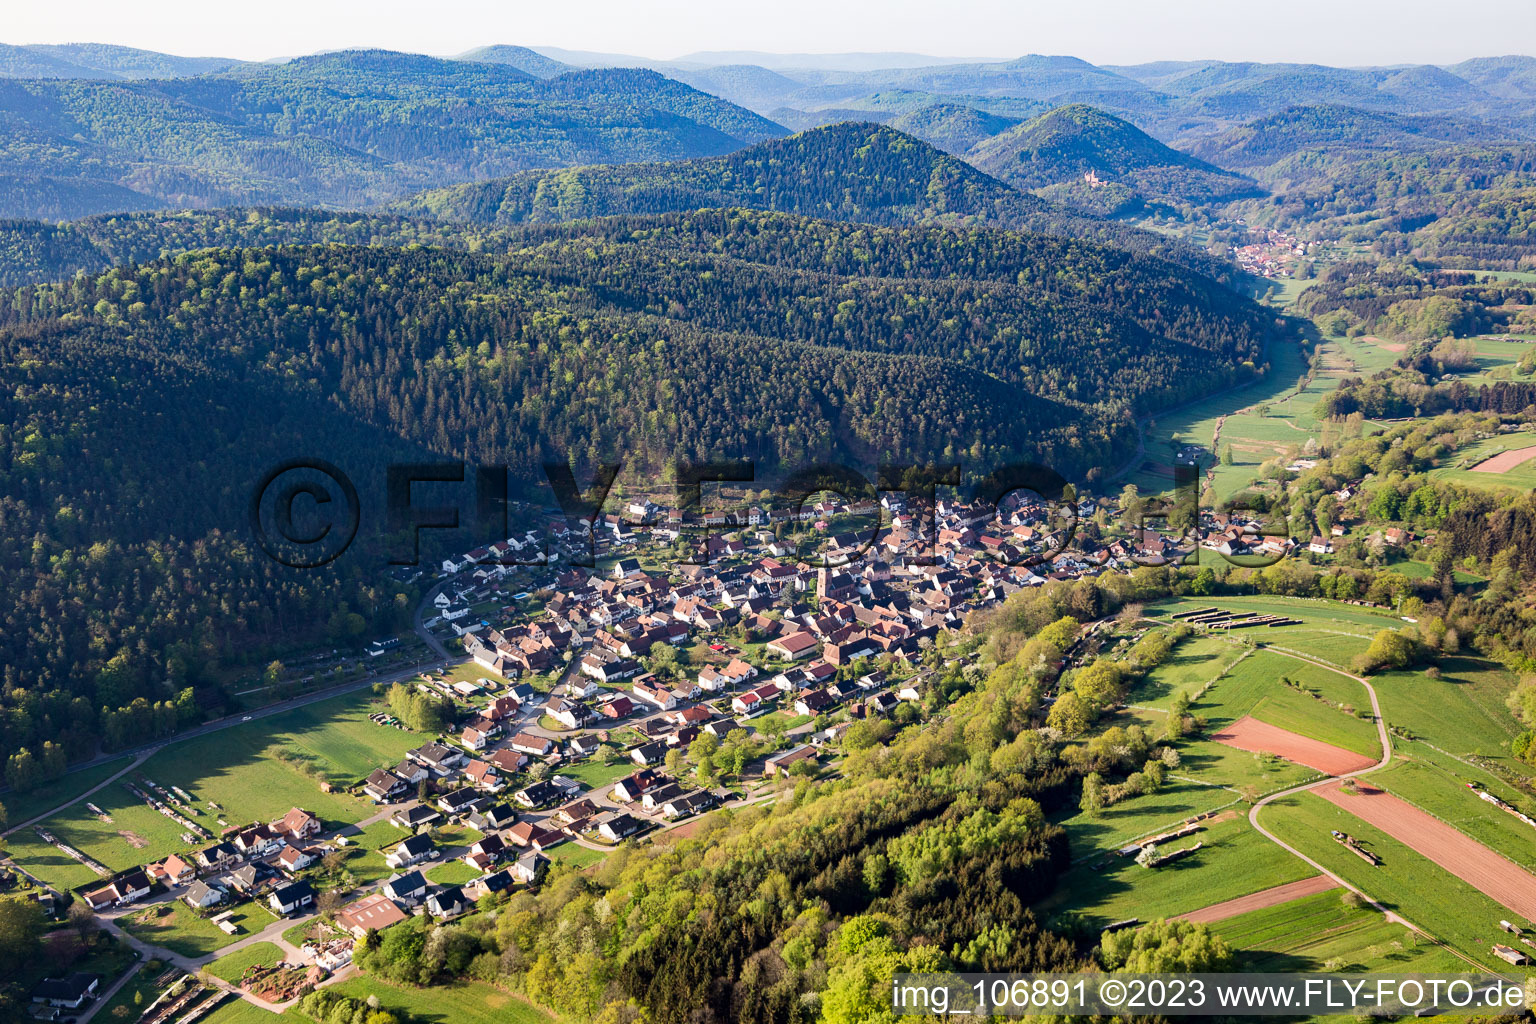 Vorderweidenthal in the state Rhineland-Palatinate, Germany seen from above